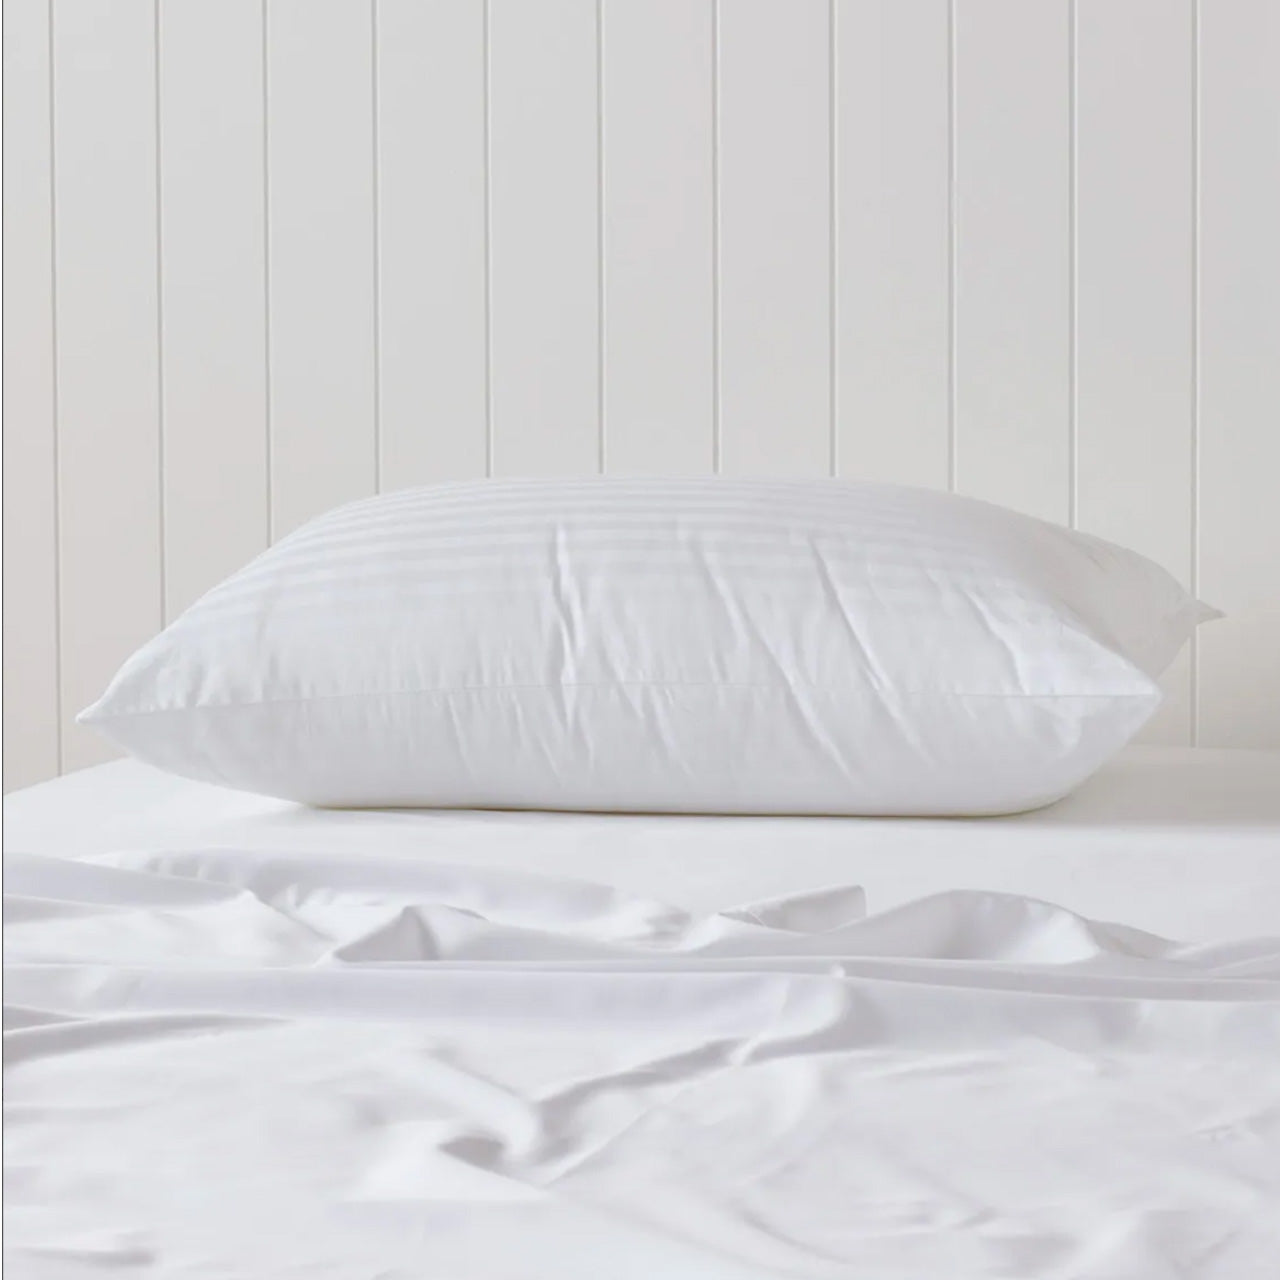 Eye level of Posture Sleep Queen Pillow on bed